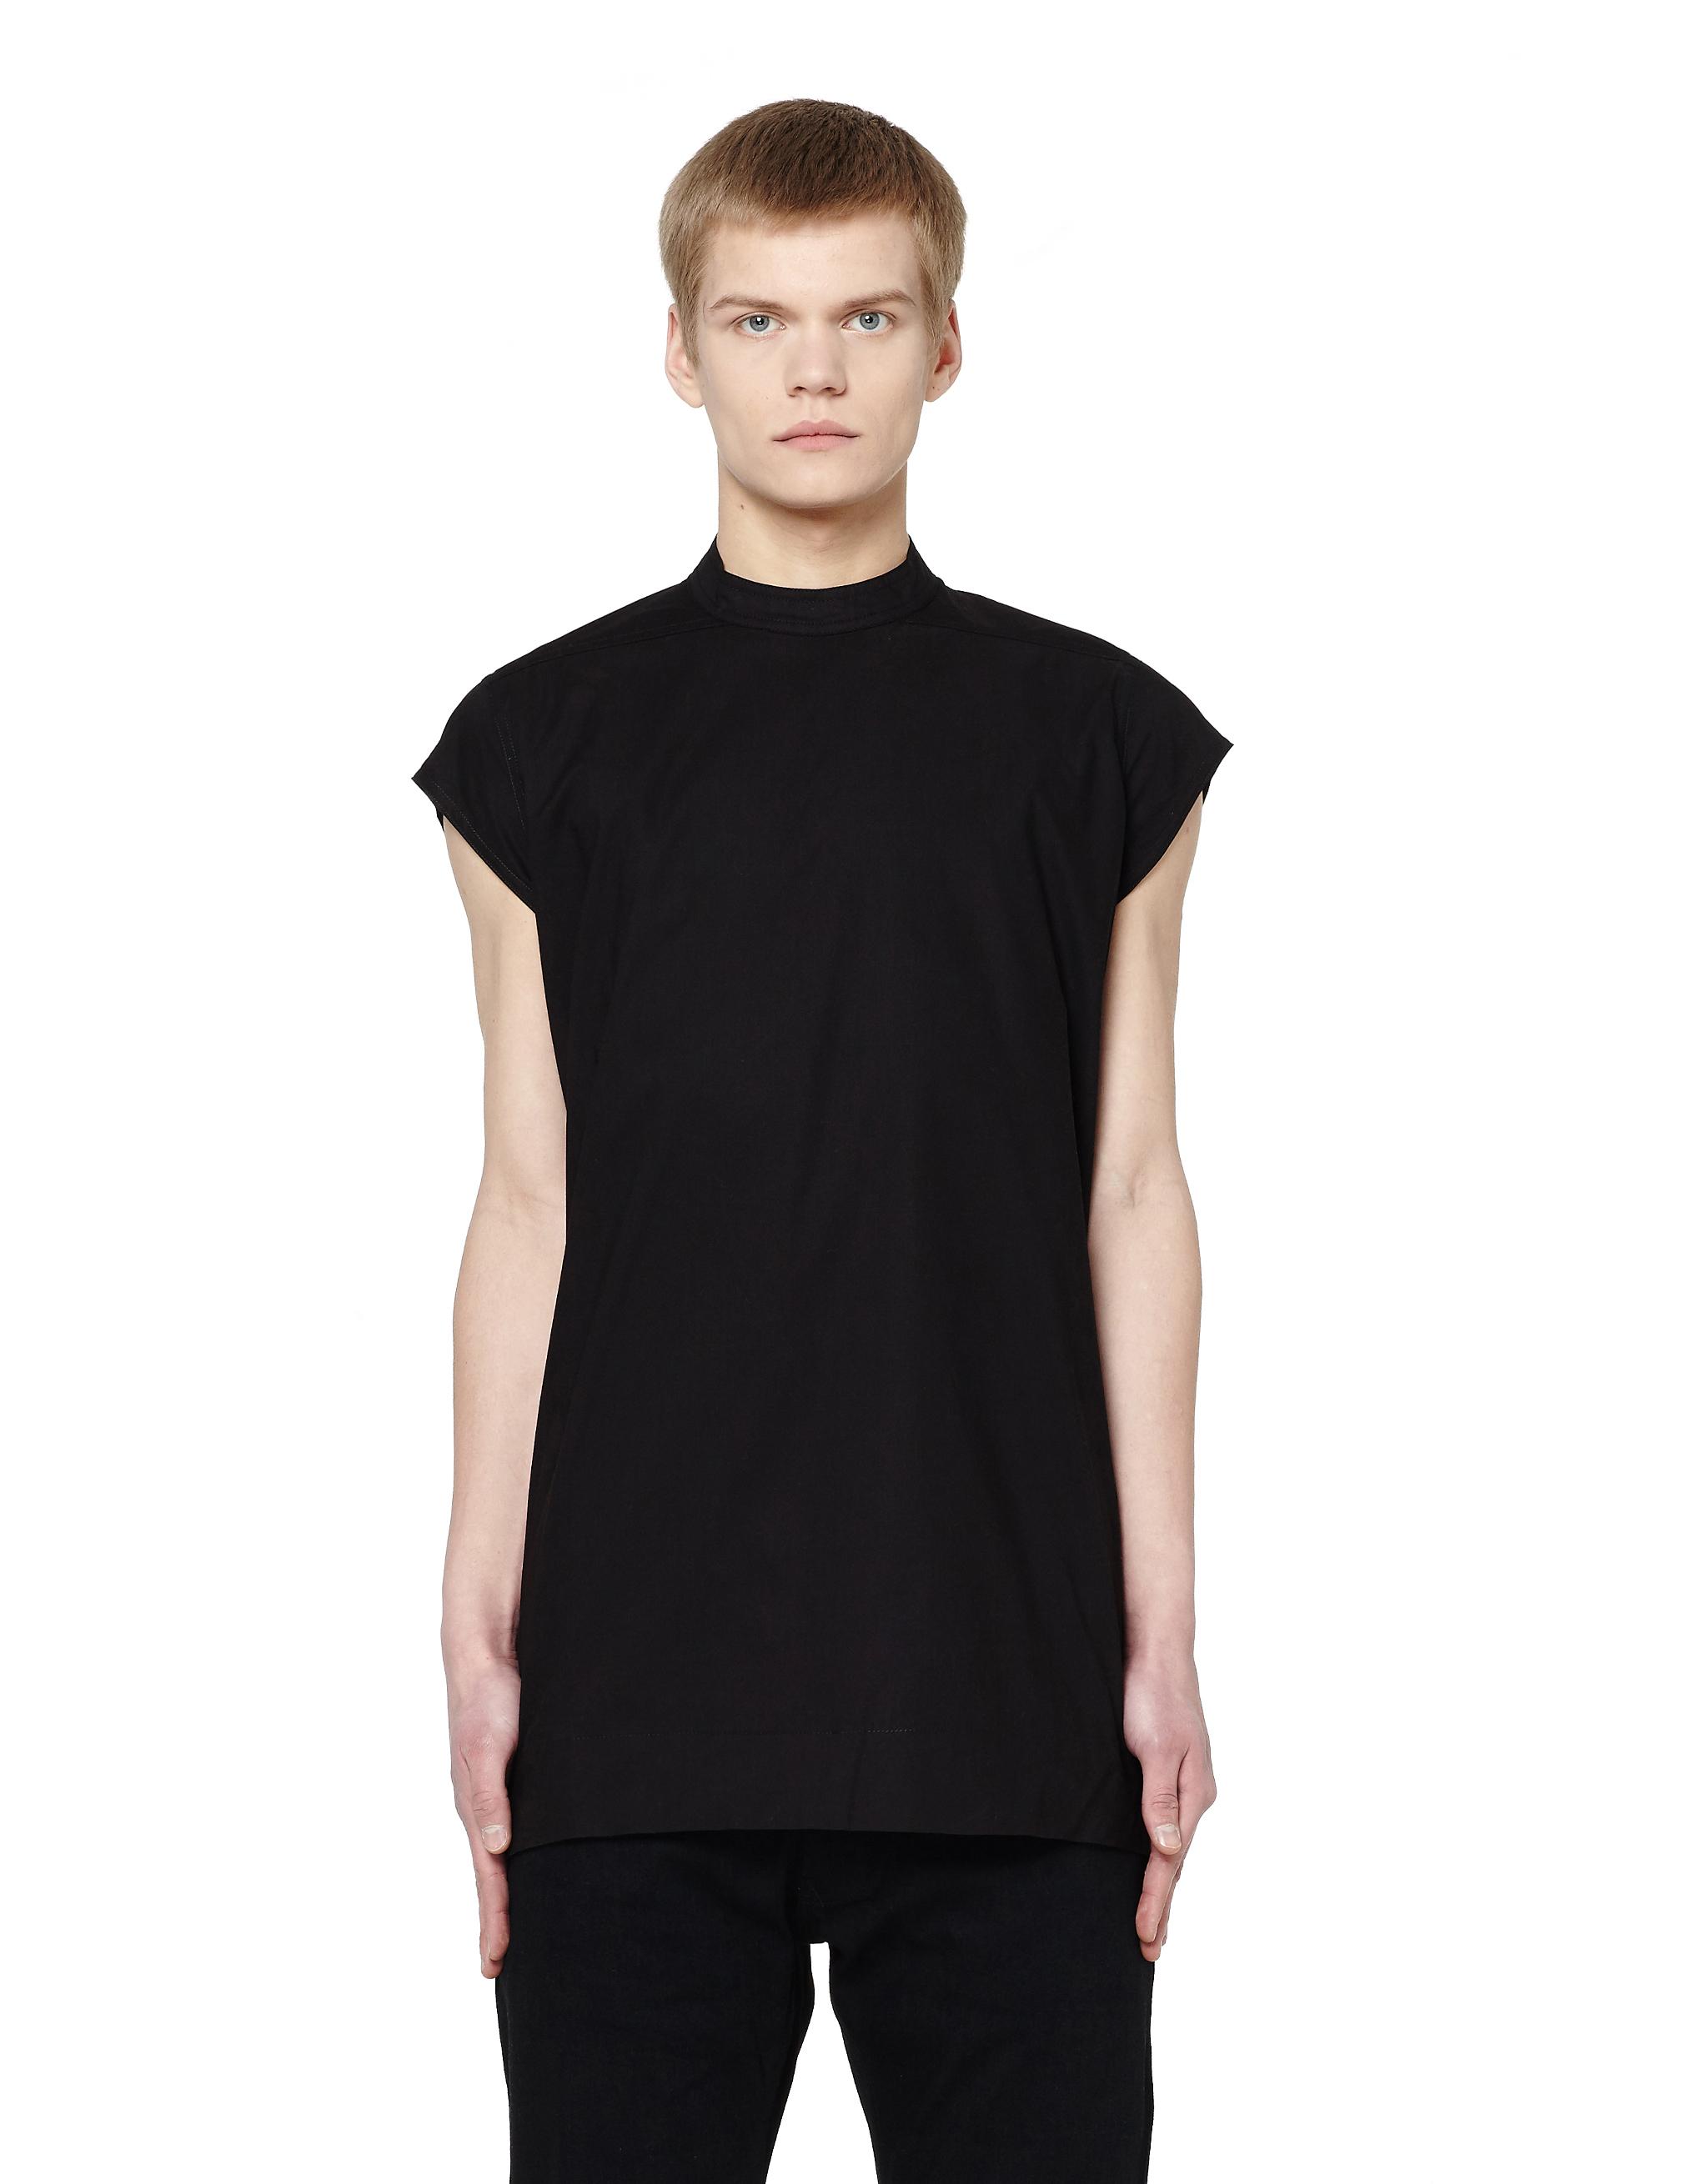 Lyst - DRKSHDW by Rick Owens Cotton T-shirt in Black for Men